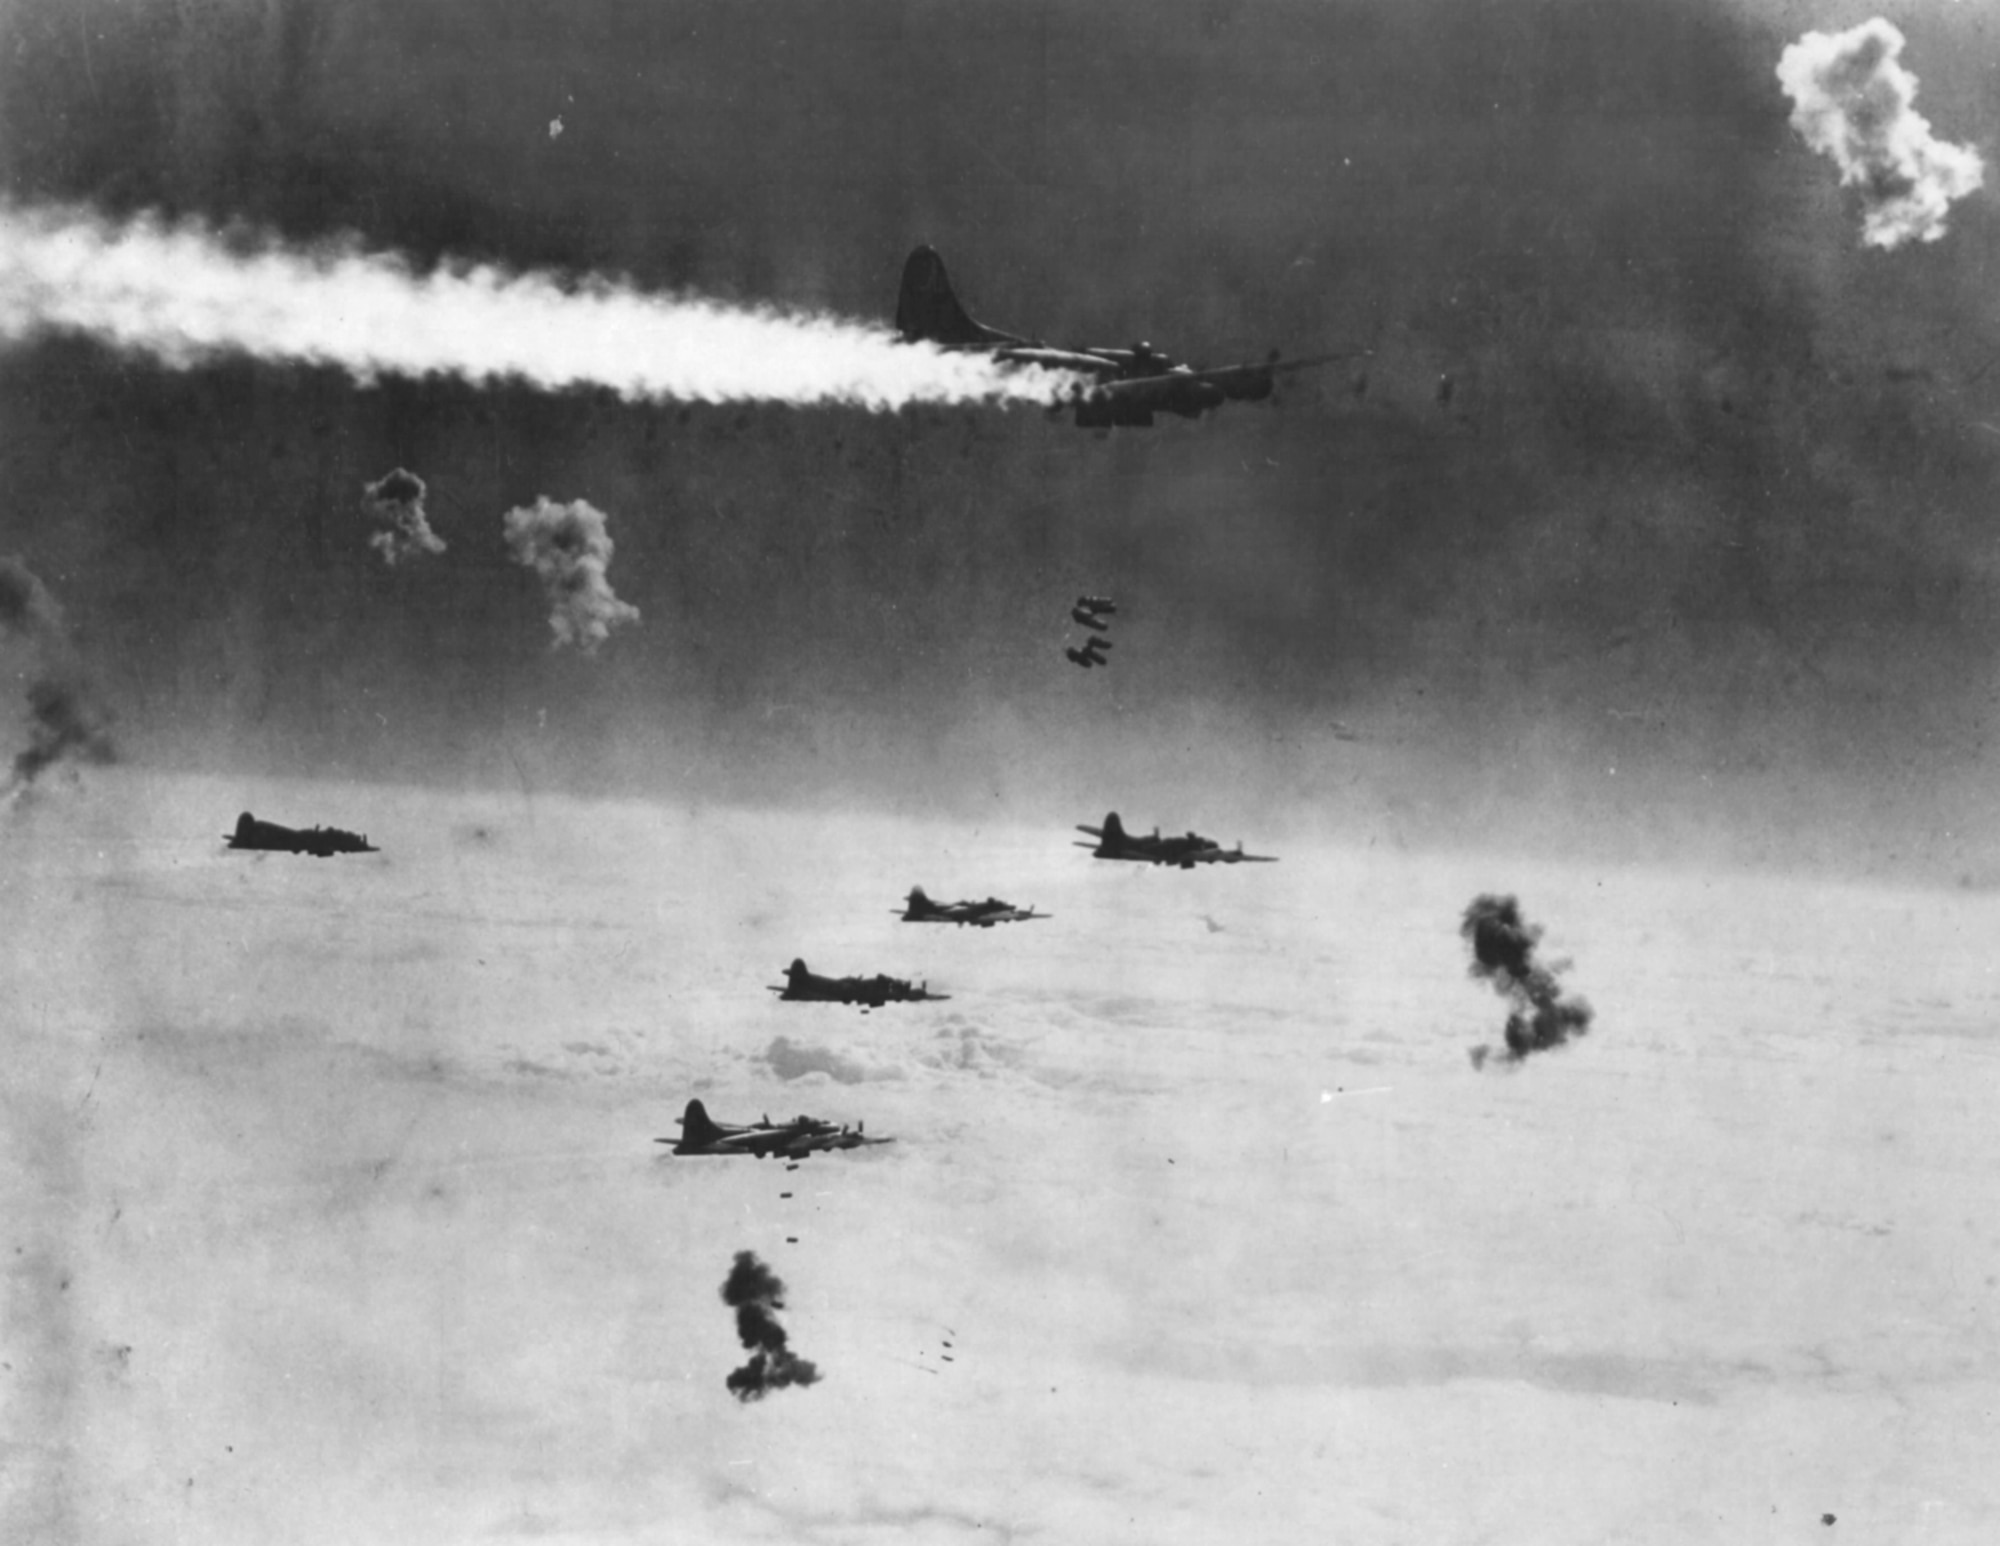 Despite being on fire and surrounded by flak bursts, this B-17 stayed in formation to drop its bombs on Berlin.  The bombers were most vulnerable on the bomb run, when they had to fly straight and level for several minutes to ensure accuracy.